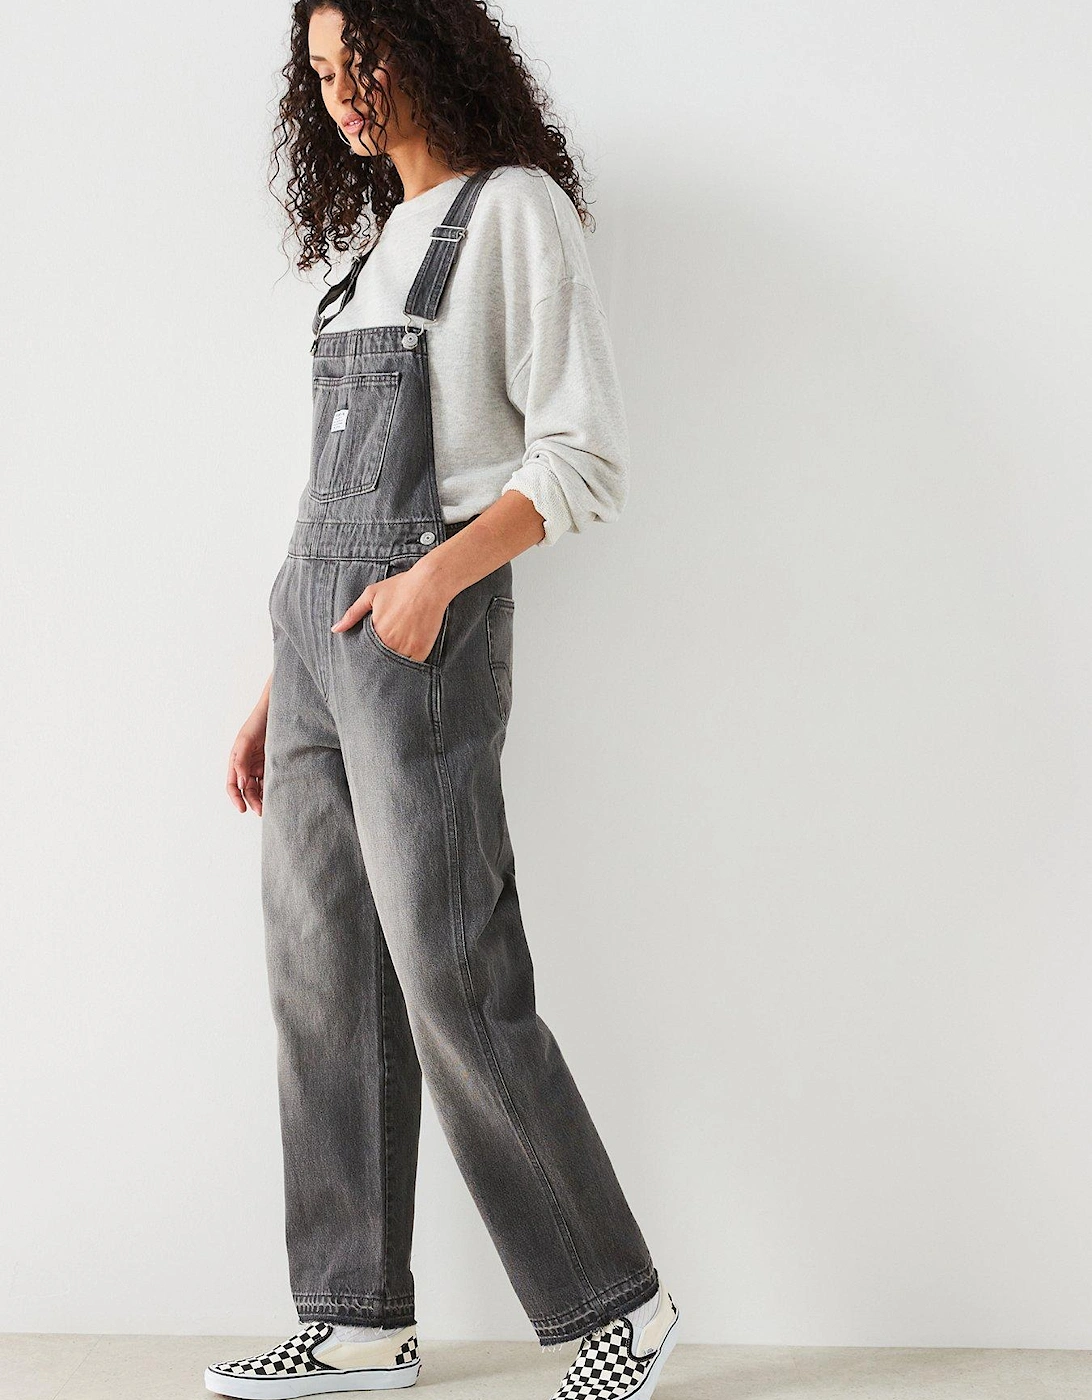 Vintage Overall Denim Dungaree - County